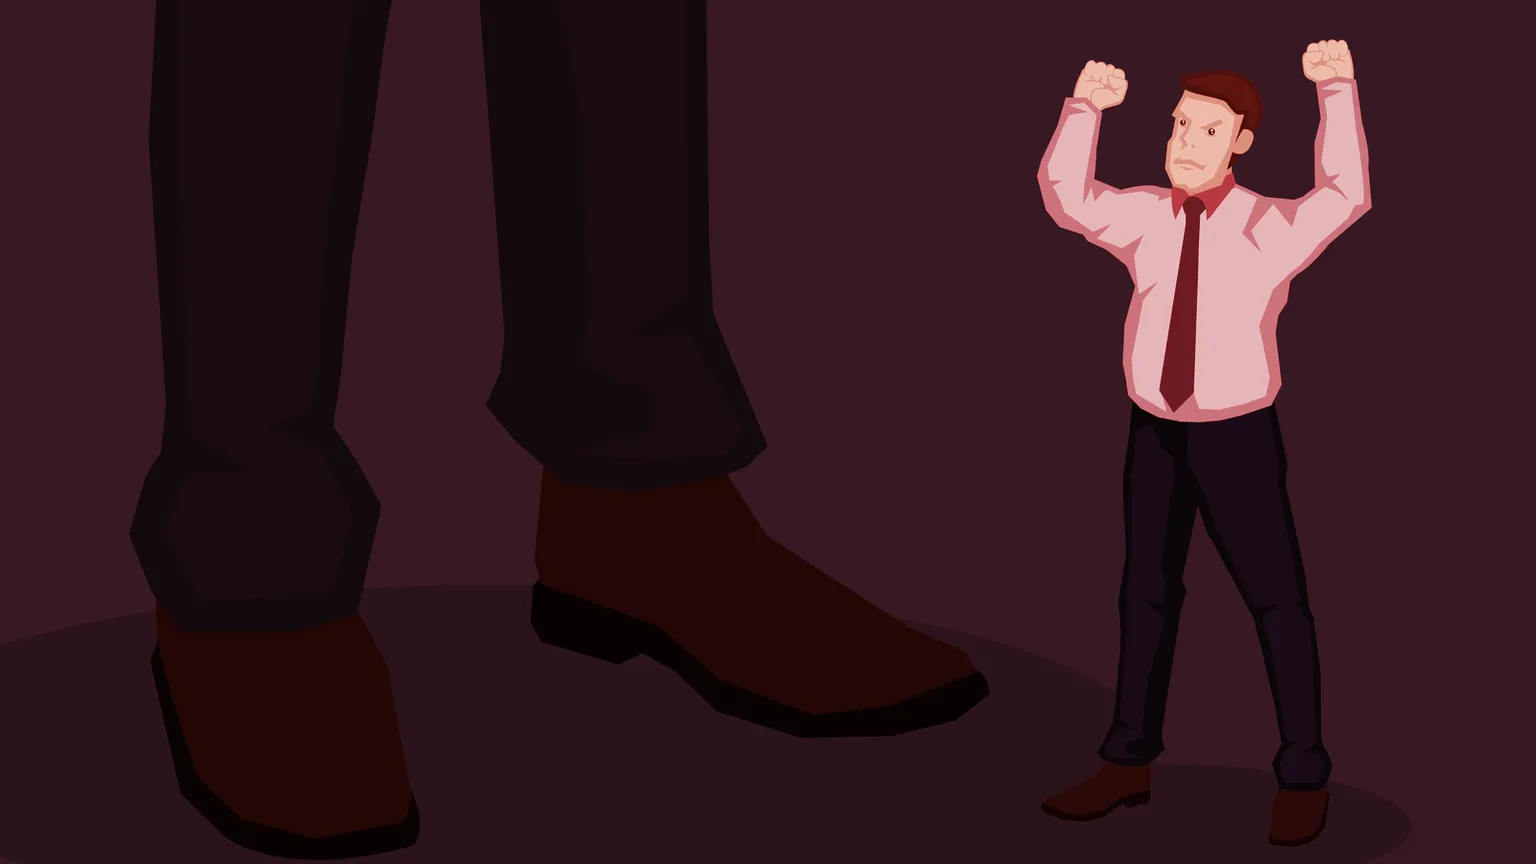 Little cartoon man with raised fist in angry gesture beside a bigger man. Image: Shutterstock